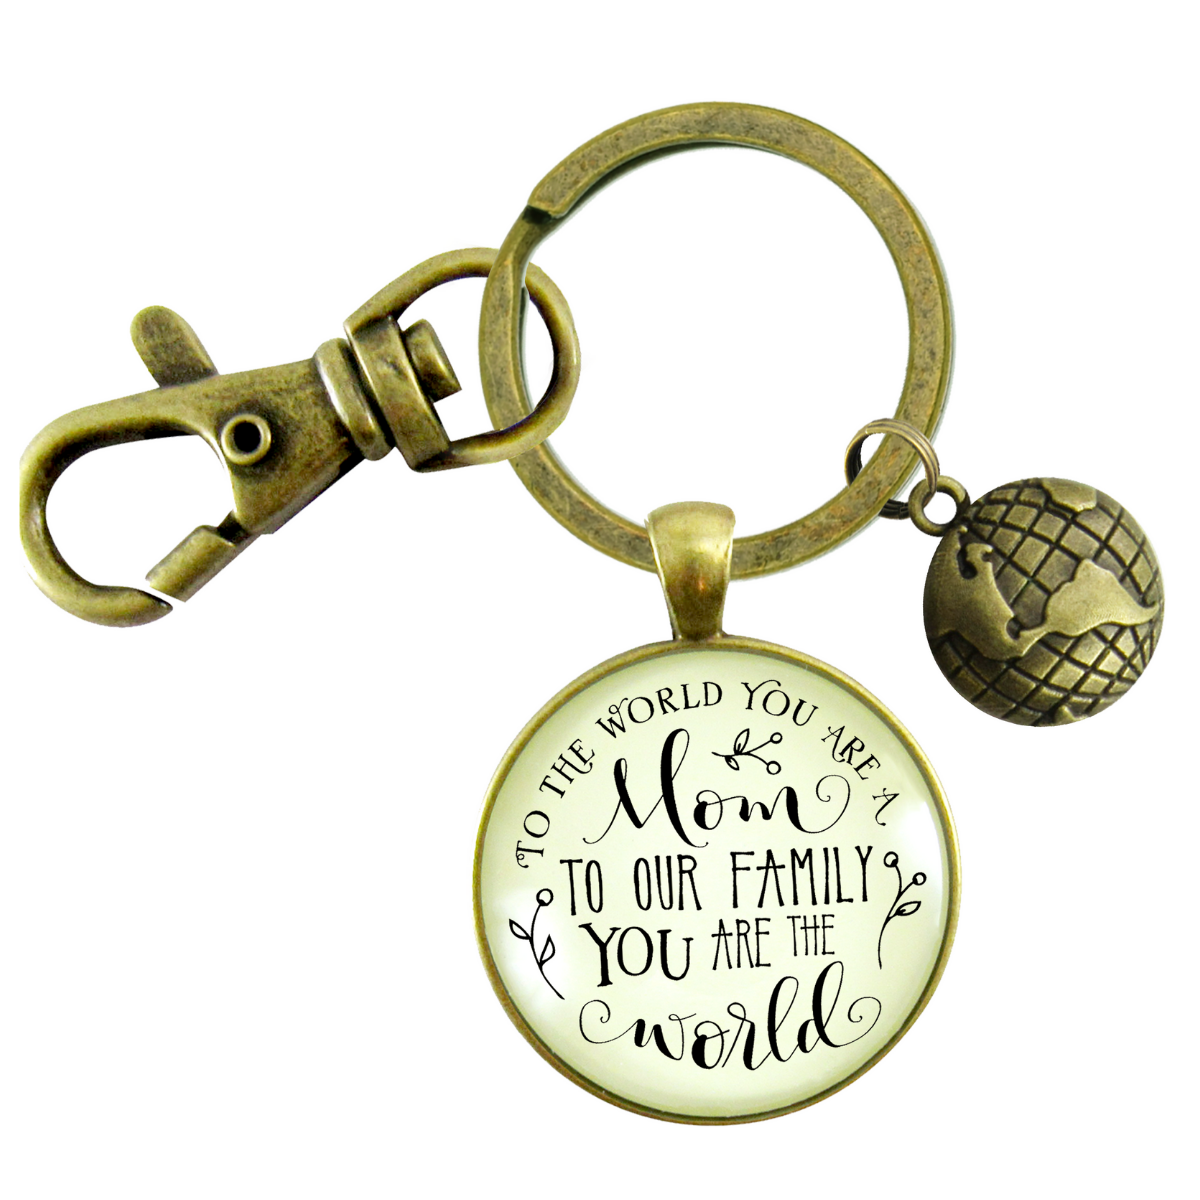 Best Mom Keychain To The World You Are Mom Family Loves You Gift Jewelry For Mother - Gutsy Goodness Handmade Jewelry;Best Mom Keychain To The World You Are Mom Family Loves You Gift Jewelry For Mother - Gutsy Goodness Handmade Jewelry Gifts